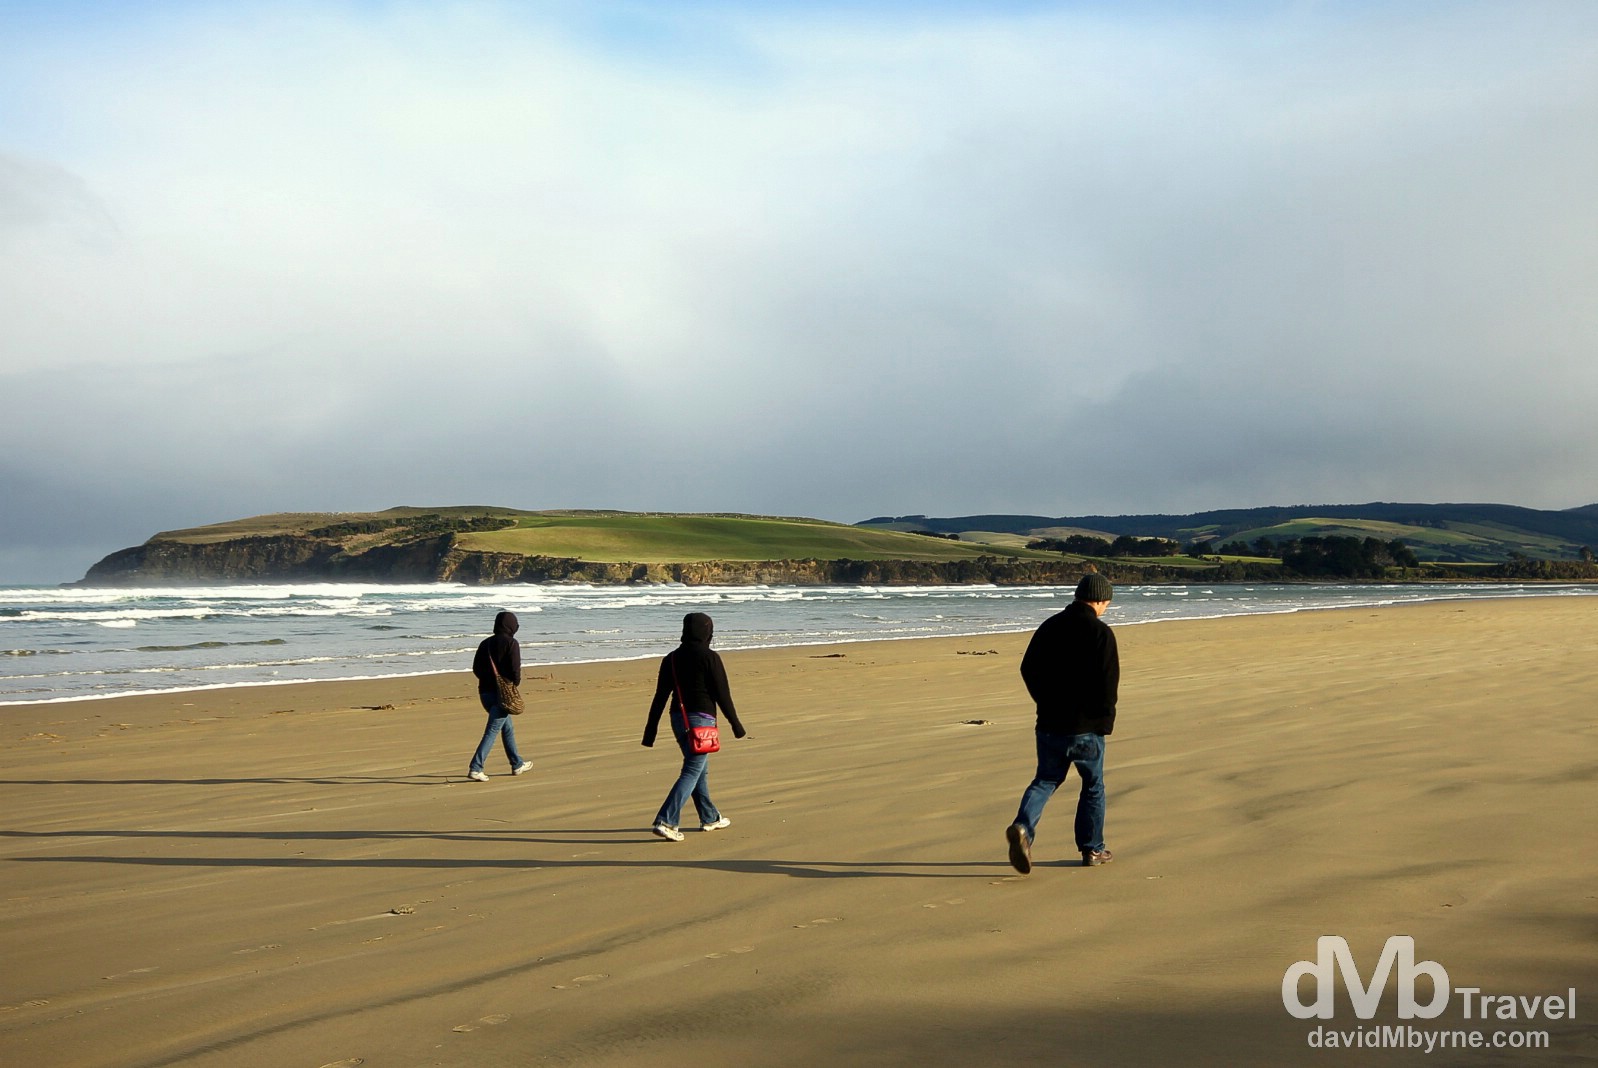 Strolling on the beach at Surat Bay, The Catlins, South Island, New Zealand. May 28th 2012.